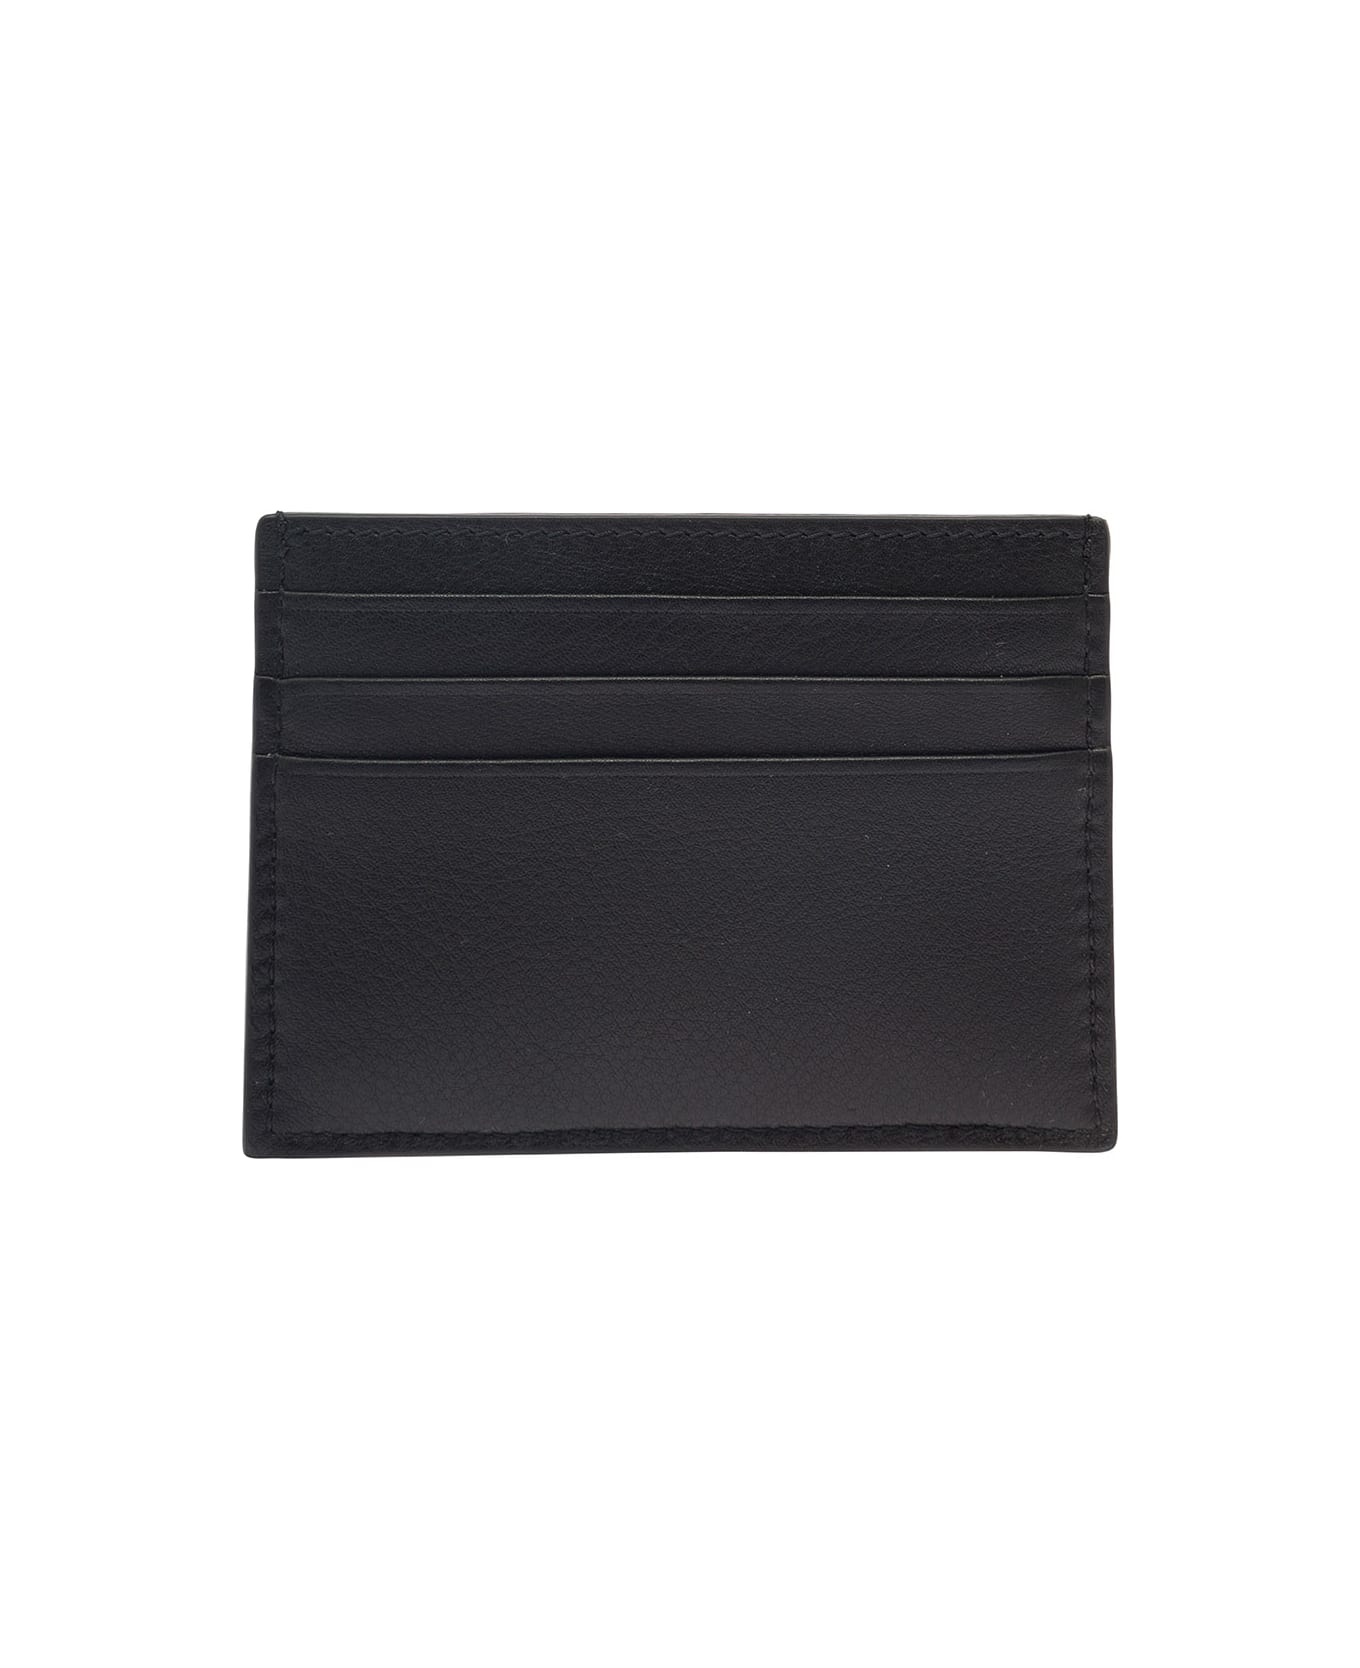 Alexander McQueen Black Card-holder With Harness Detail In Leather Man - Black